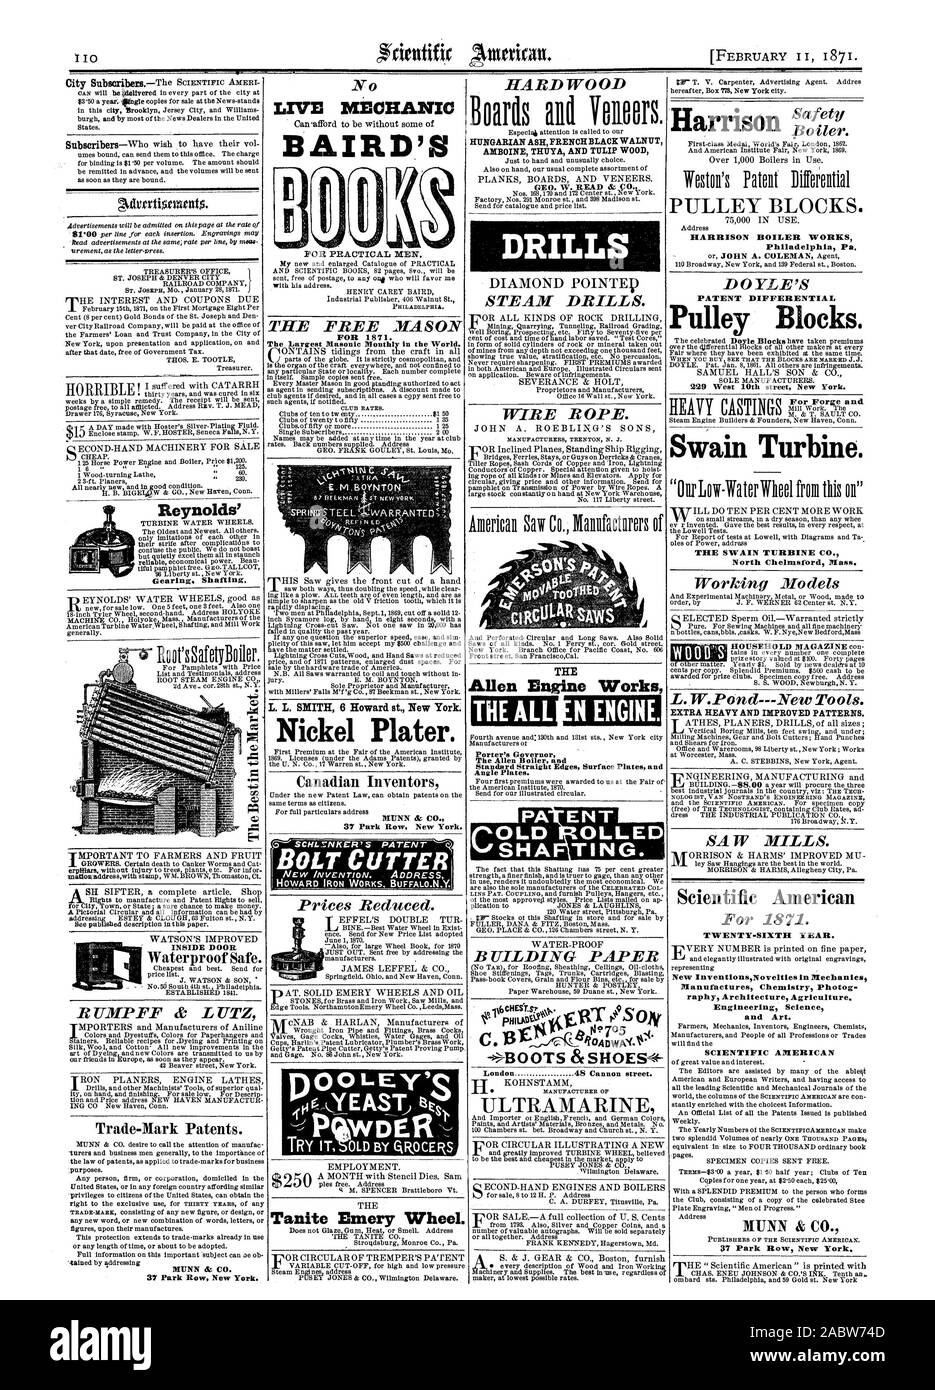 City Subintoih MUNN & CO. 37 Park Row New York. THE FREE MASON FOR 1871. The Largest Masonic Monthly in the World. L. L. SMITH 6 Howard st. New York. Nickel Plater. Canadian Inventors MUNN & CO. 37 Park Row New York. [BOLT CUTTER  Prices Reduced. Tanite Emery Wheel. HARDWOOD Boards ad VoRoors. HUNGARIAN ASH FRENCH BLACK WALNUT ANIBOINE THUYA AND TULIP WOOD GEO. W. READ & CO. DRILLS STEAM DRILLS. WIRE ROPE. THE Allen Engine Works THE ALL Porter's Governor The Allen Boiler and Standard Straight Edges Surface Plates and Angle Plates. BUILDING PAPER -BOOTS & SHOES-4 London 49 Cannon street Stock Photo